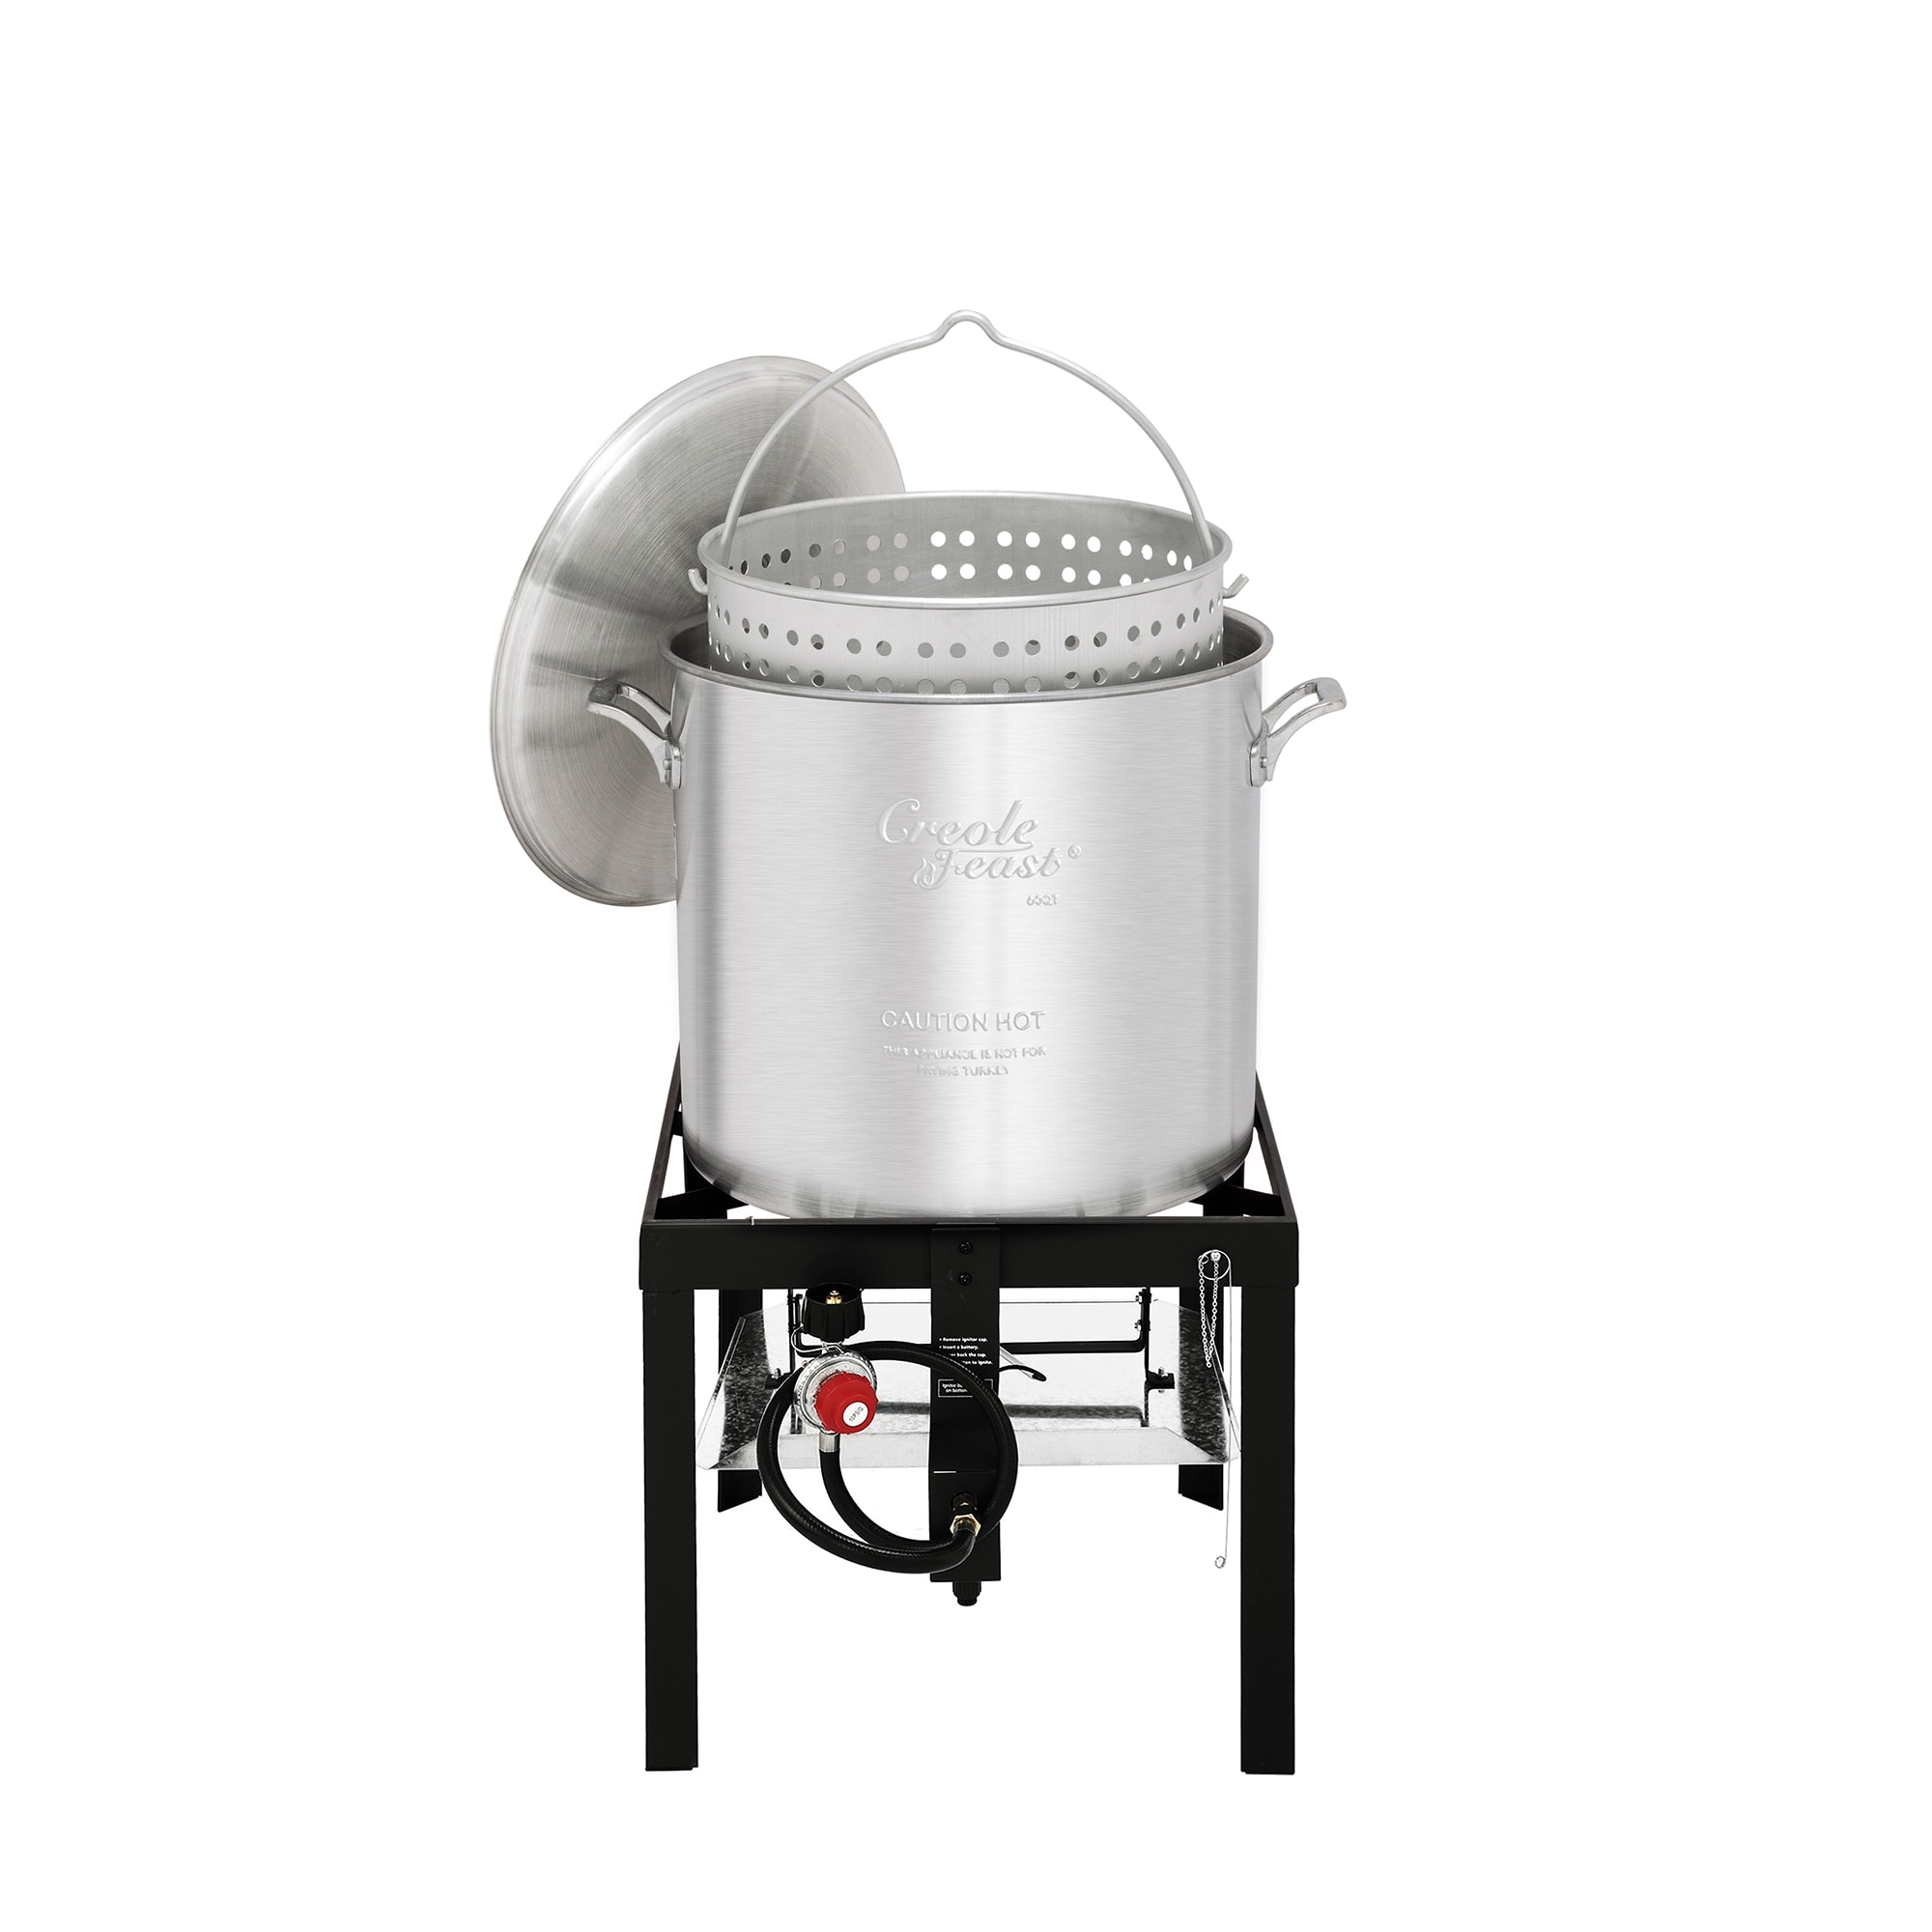 The St. Romain Cooker - The Original Multi-Jet Natural Gas Burner  Never  run out of propane in the middle of a crawfish boil again, the Bayou Boiler  is the first multi-jet